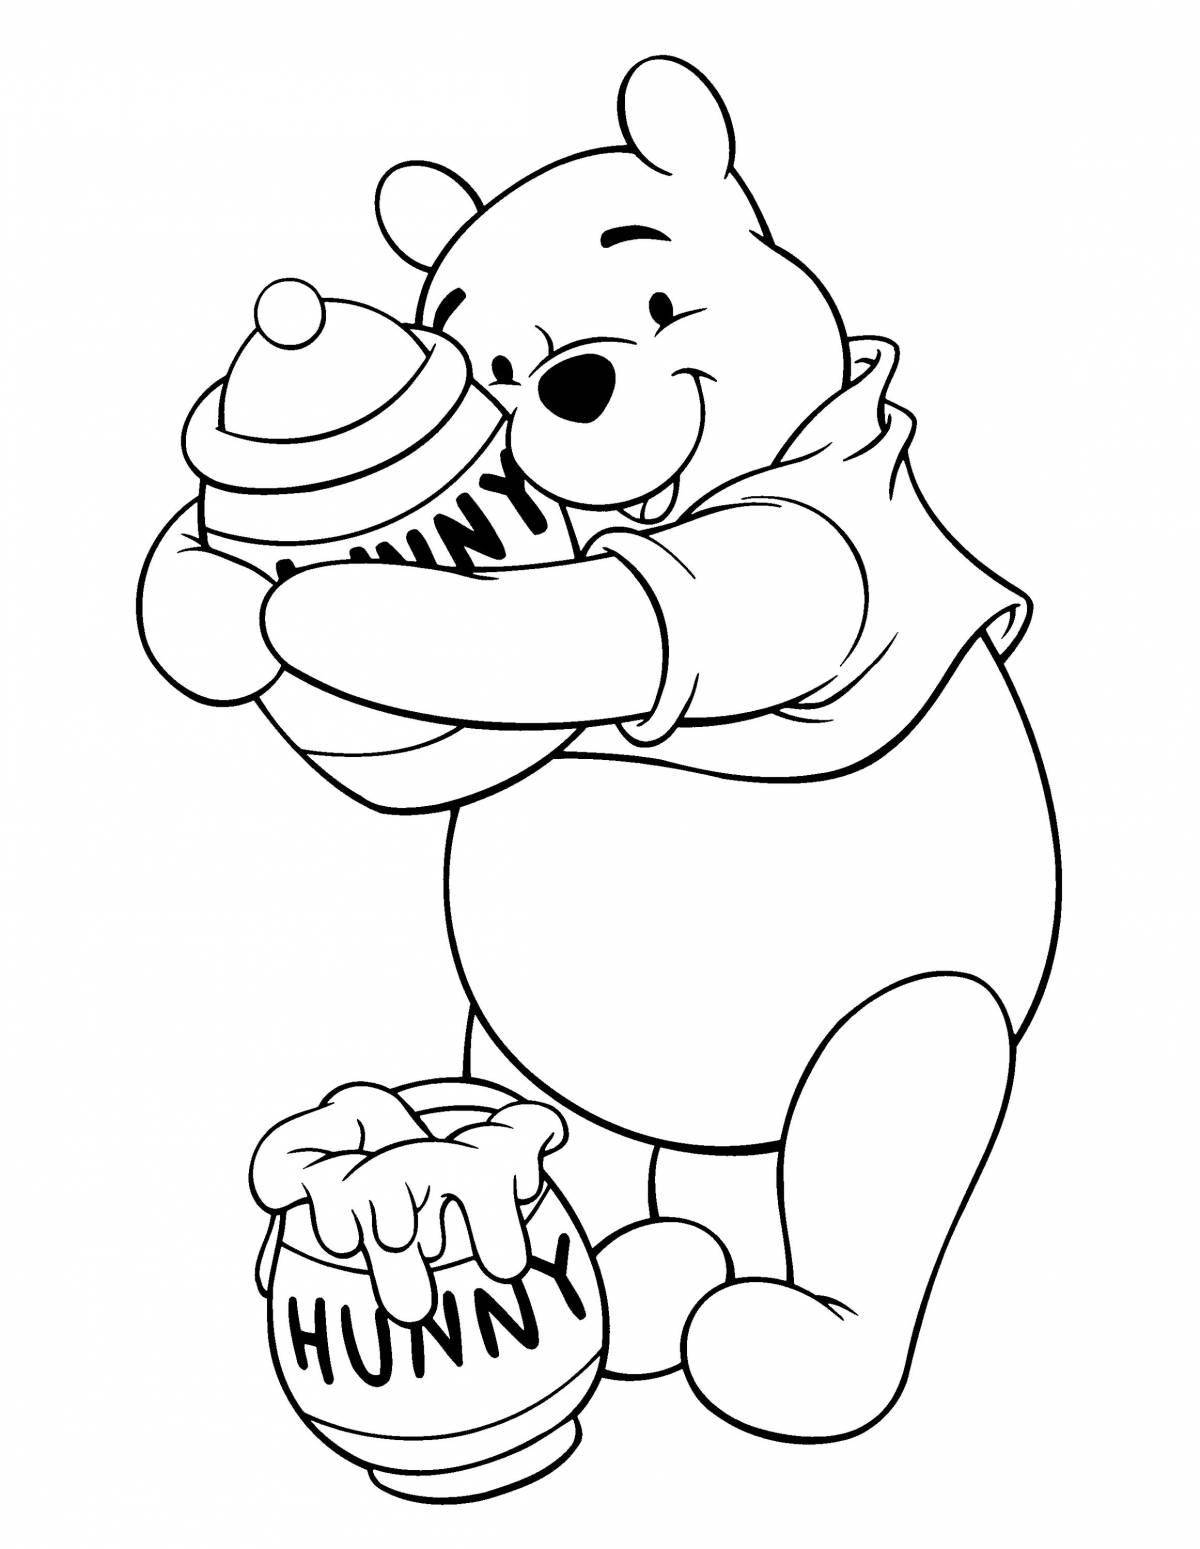 Winnie the pooh for kids #7